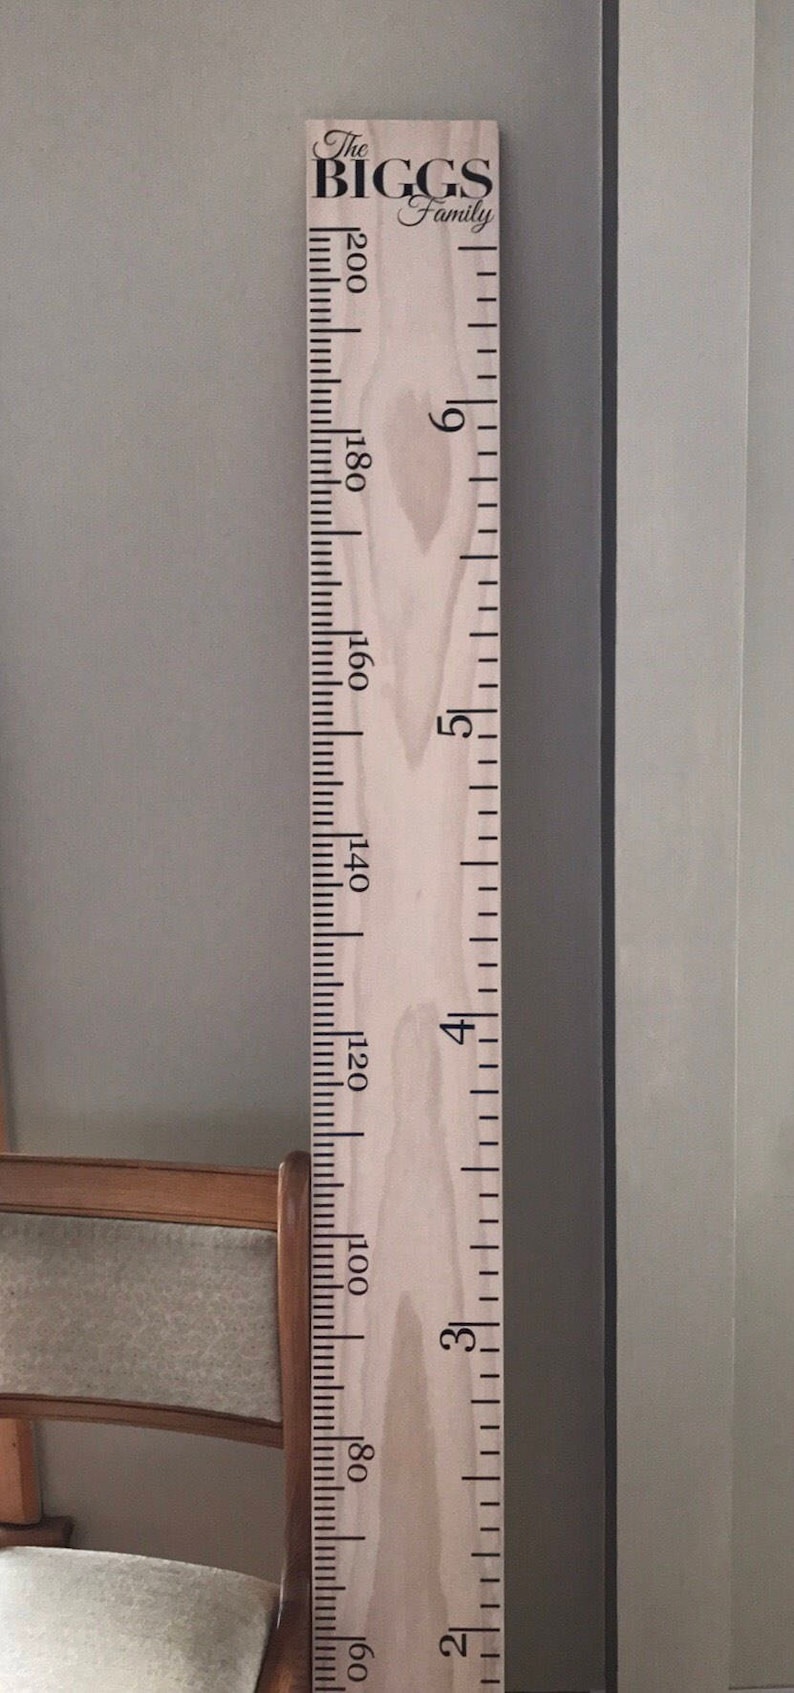 Completed custom made personalised wooden ruler height chart Metric and or imperial measurements made to order in Australia image 5